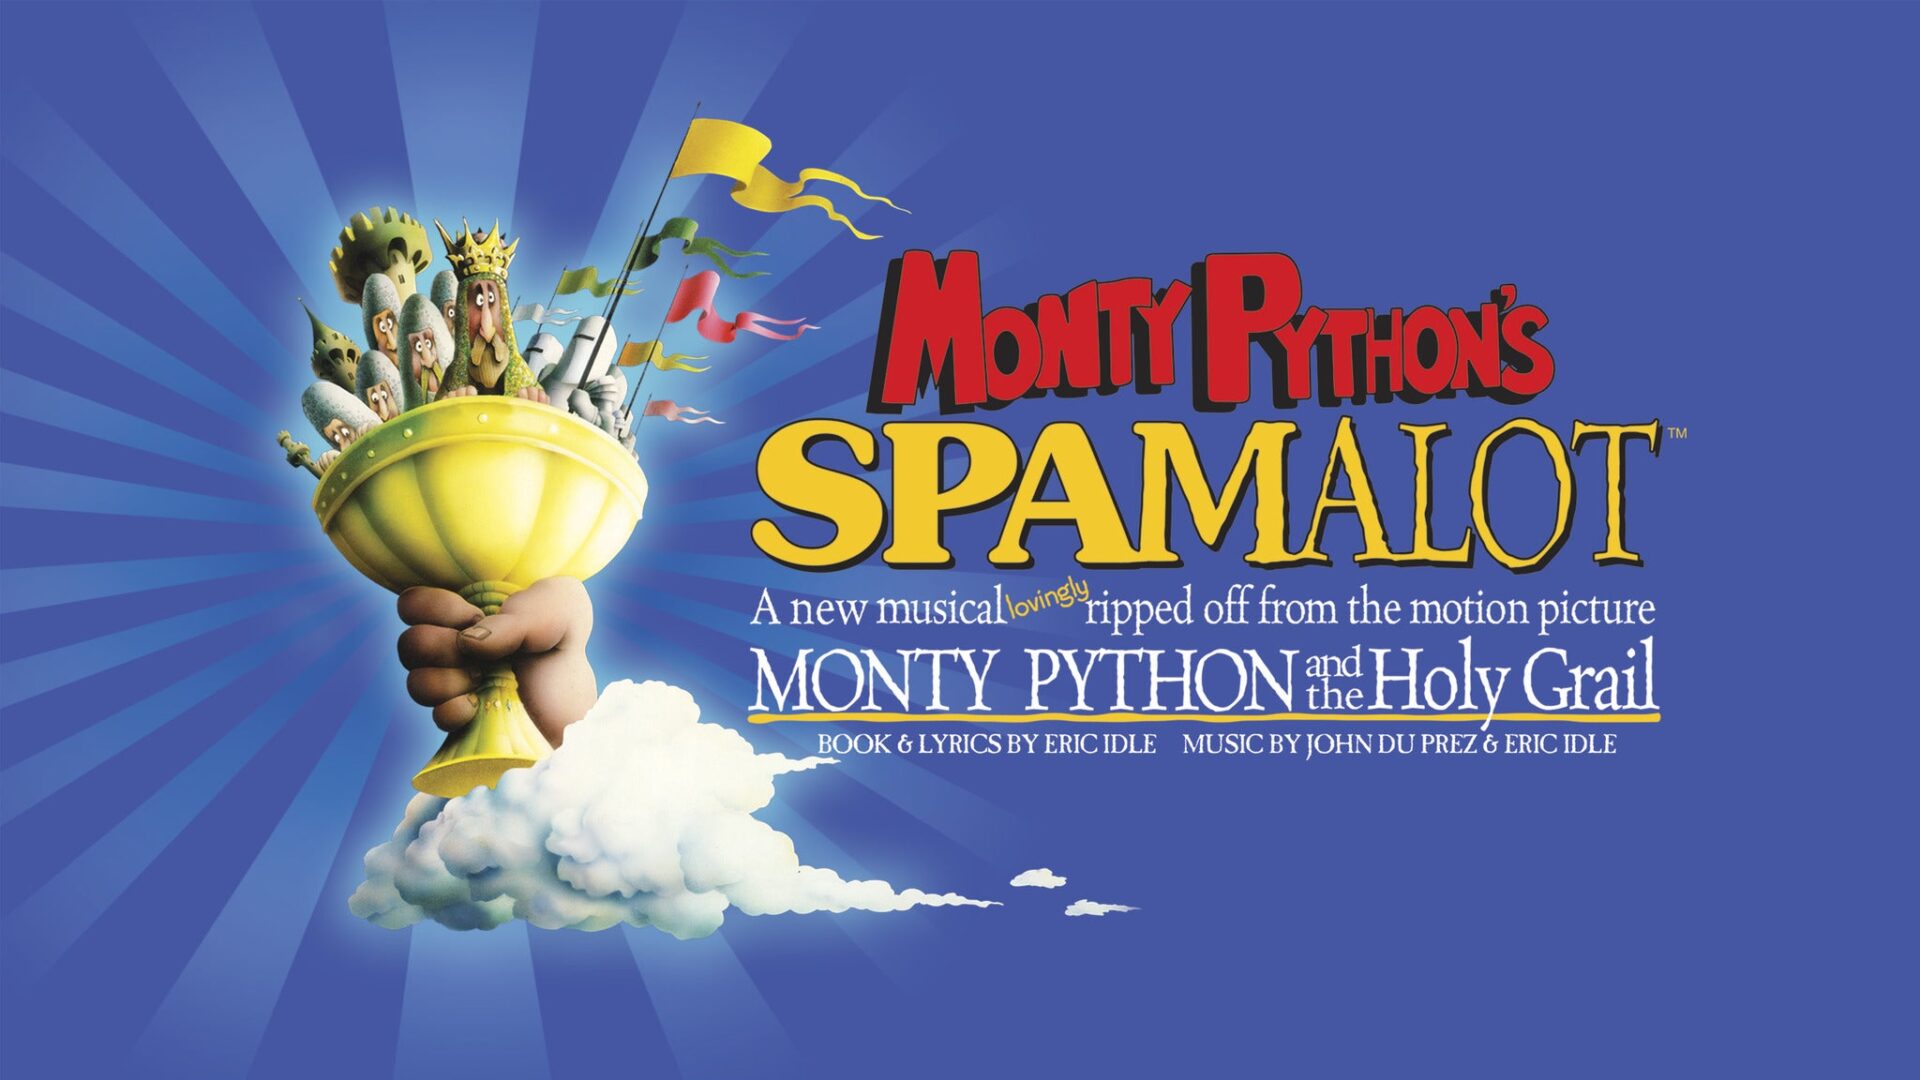 The Kennedy Center to produce SPAMALOT starring ALEX BRIGHTMAN, JAMES